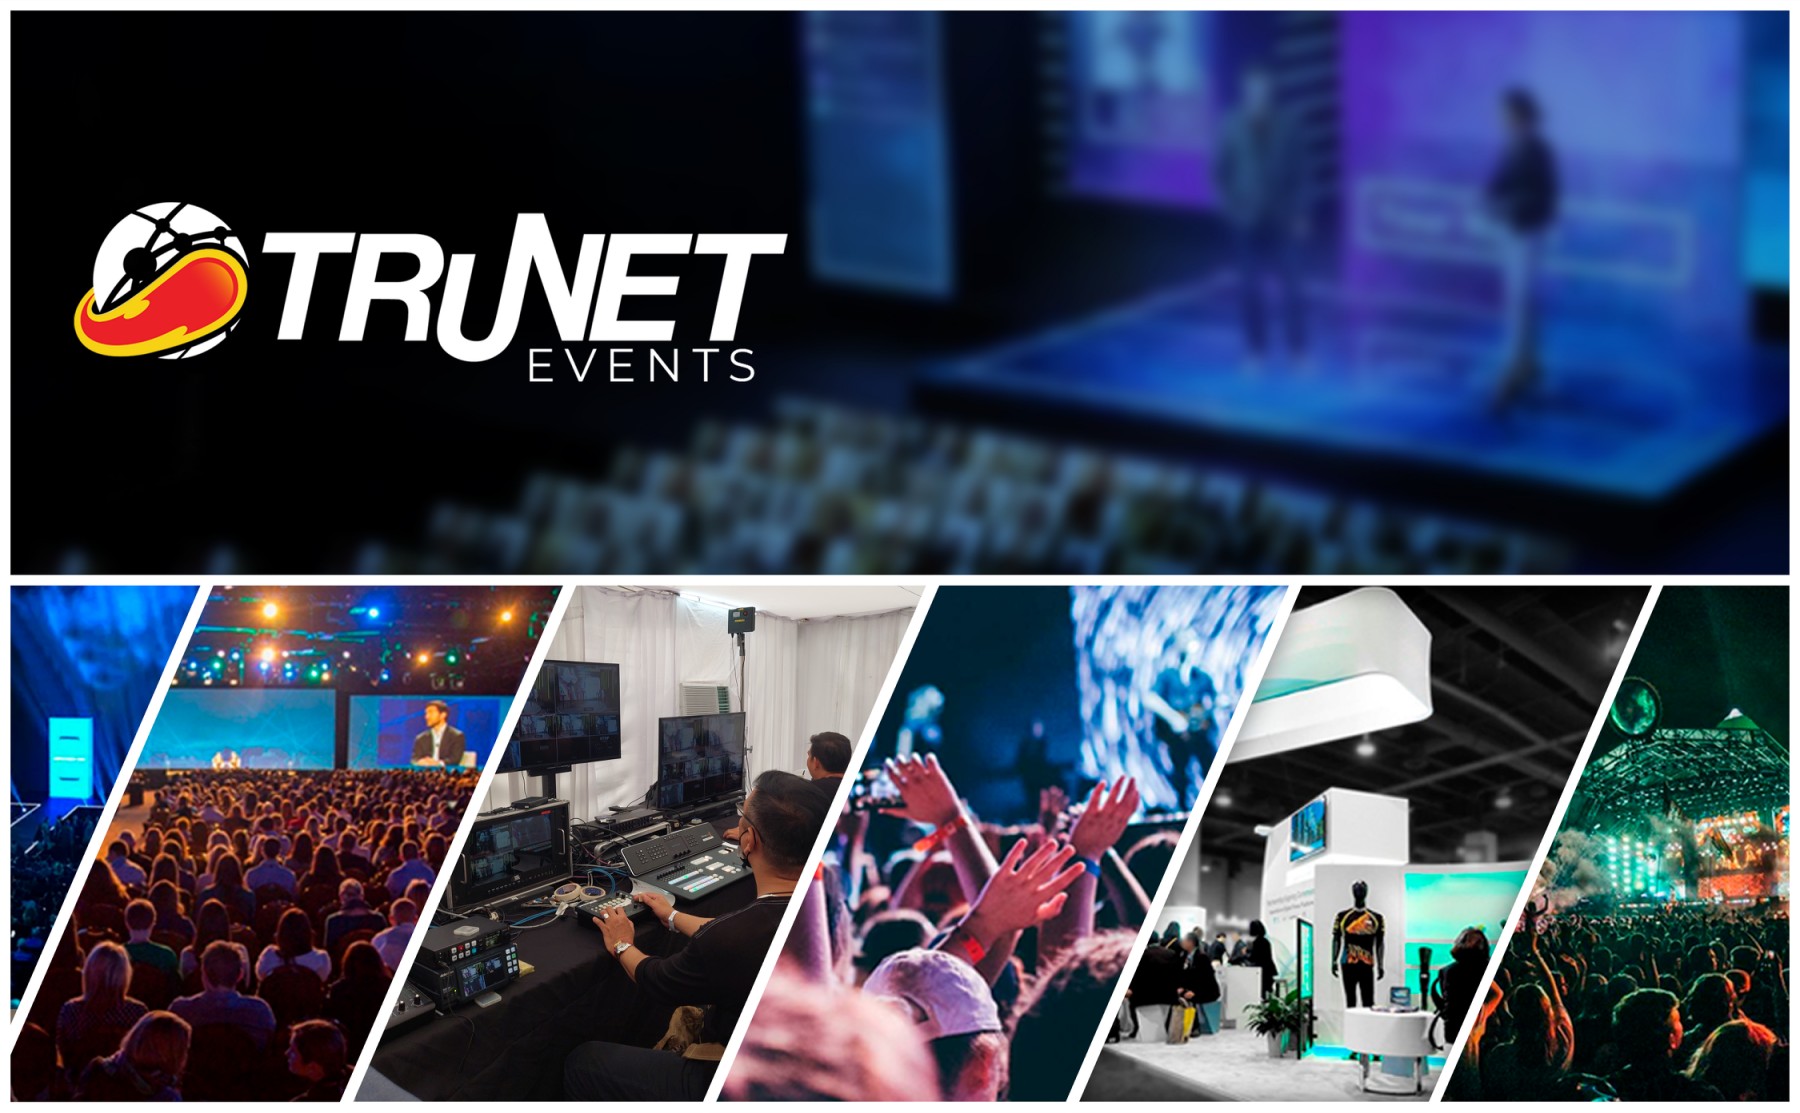 trunet events with sample event photos